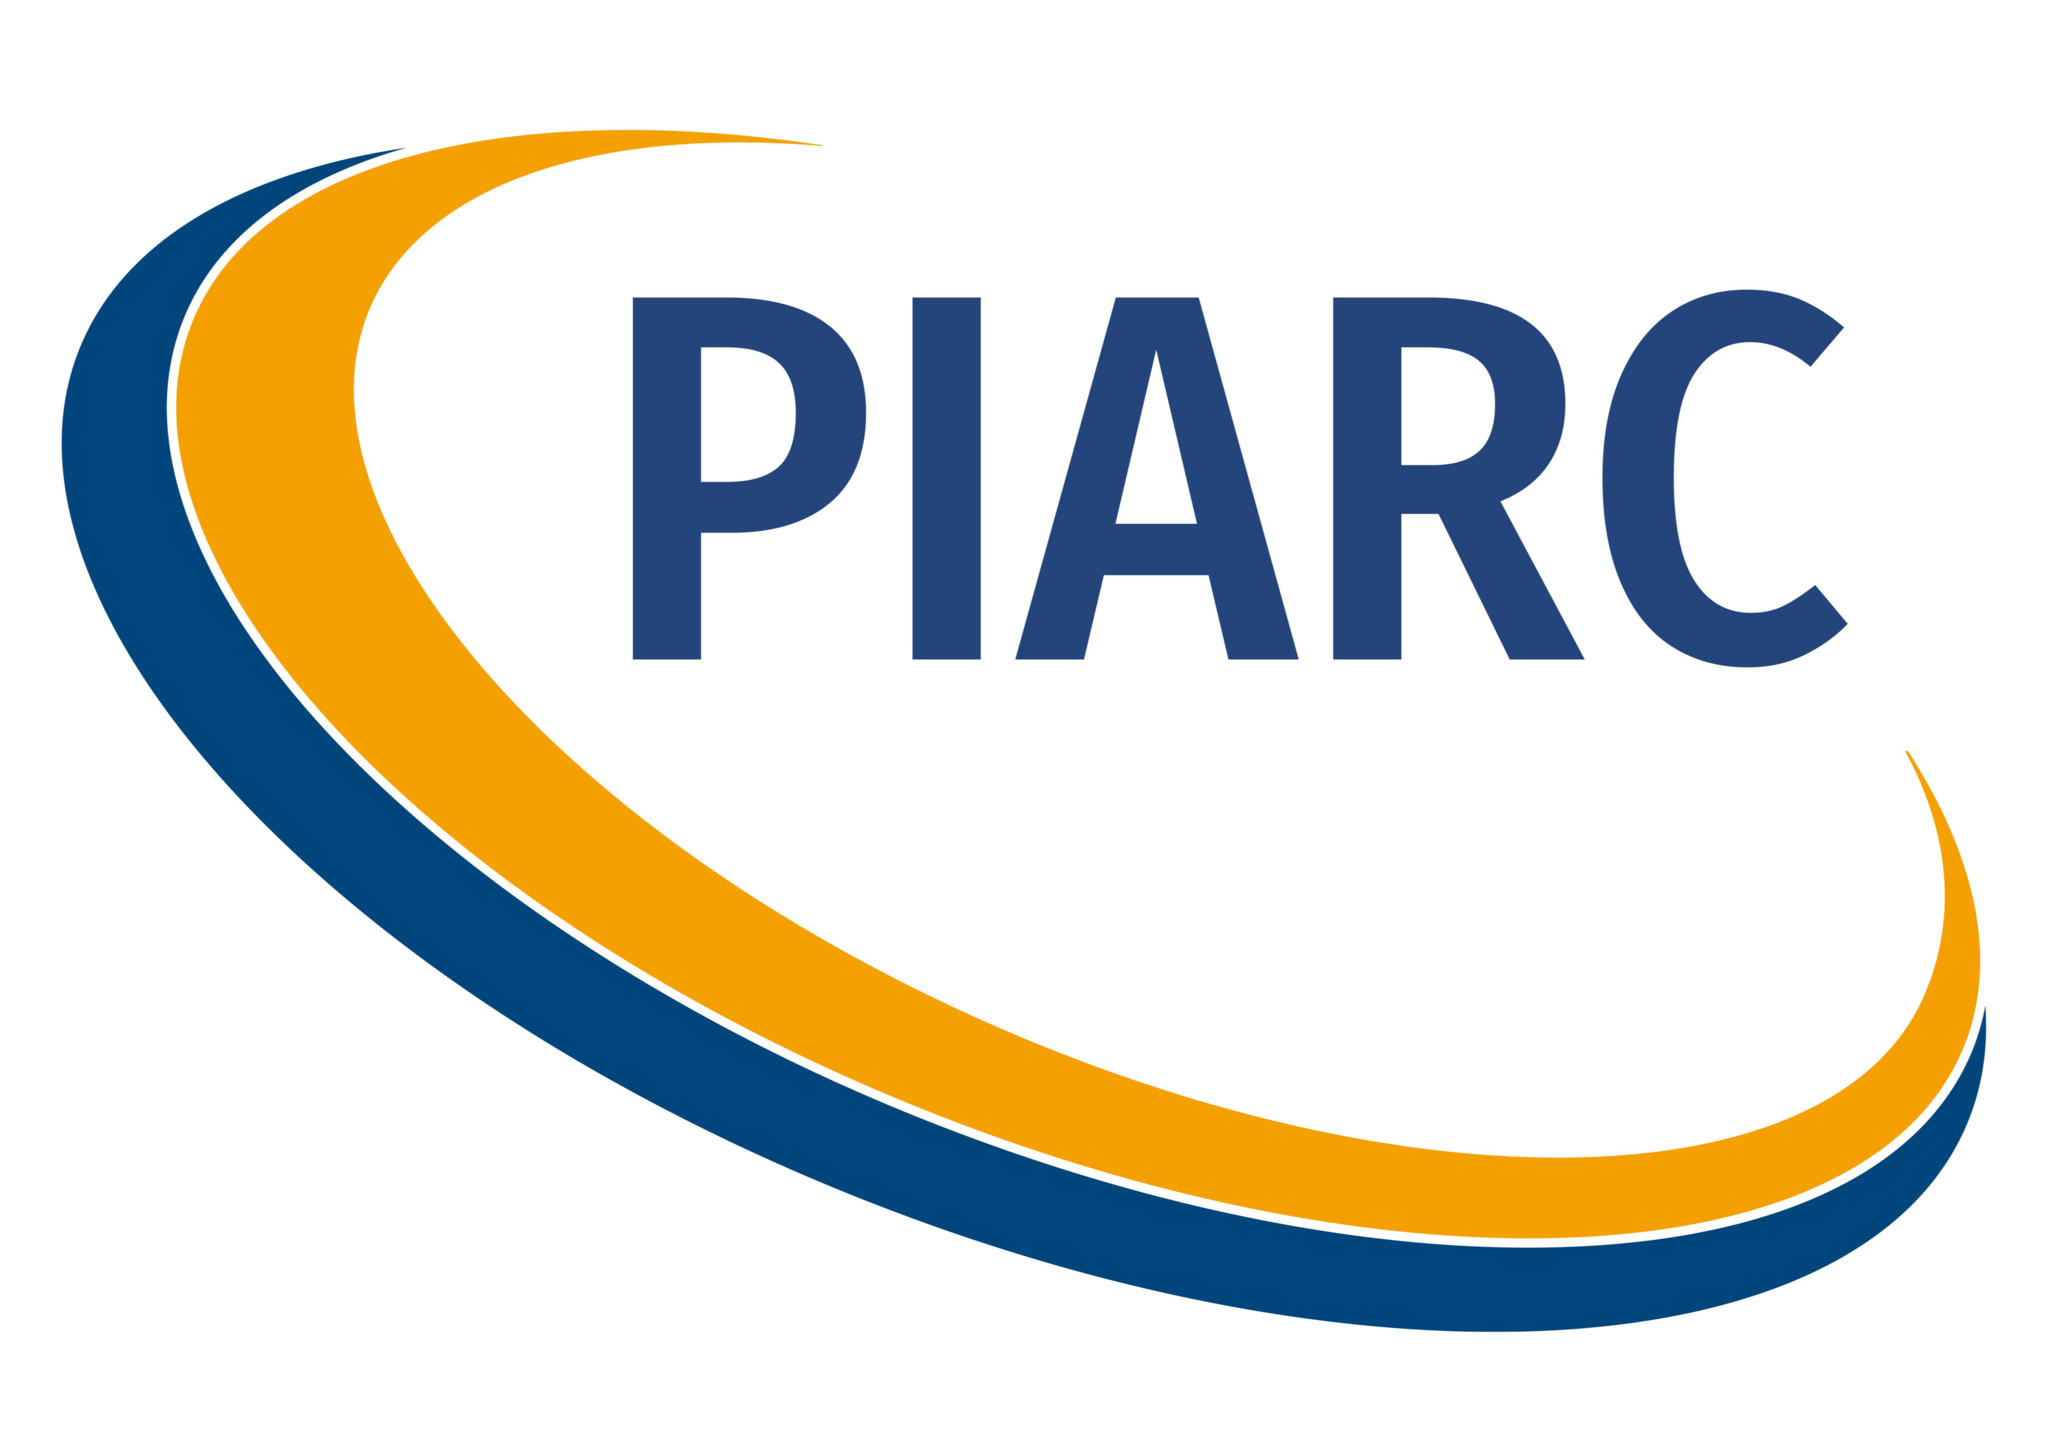 The World Road Association (PIARC)